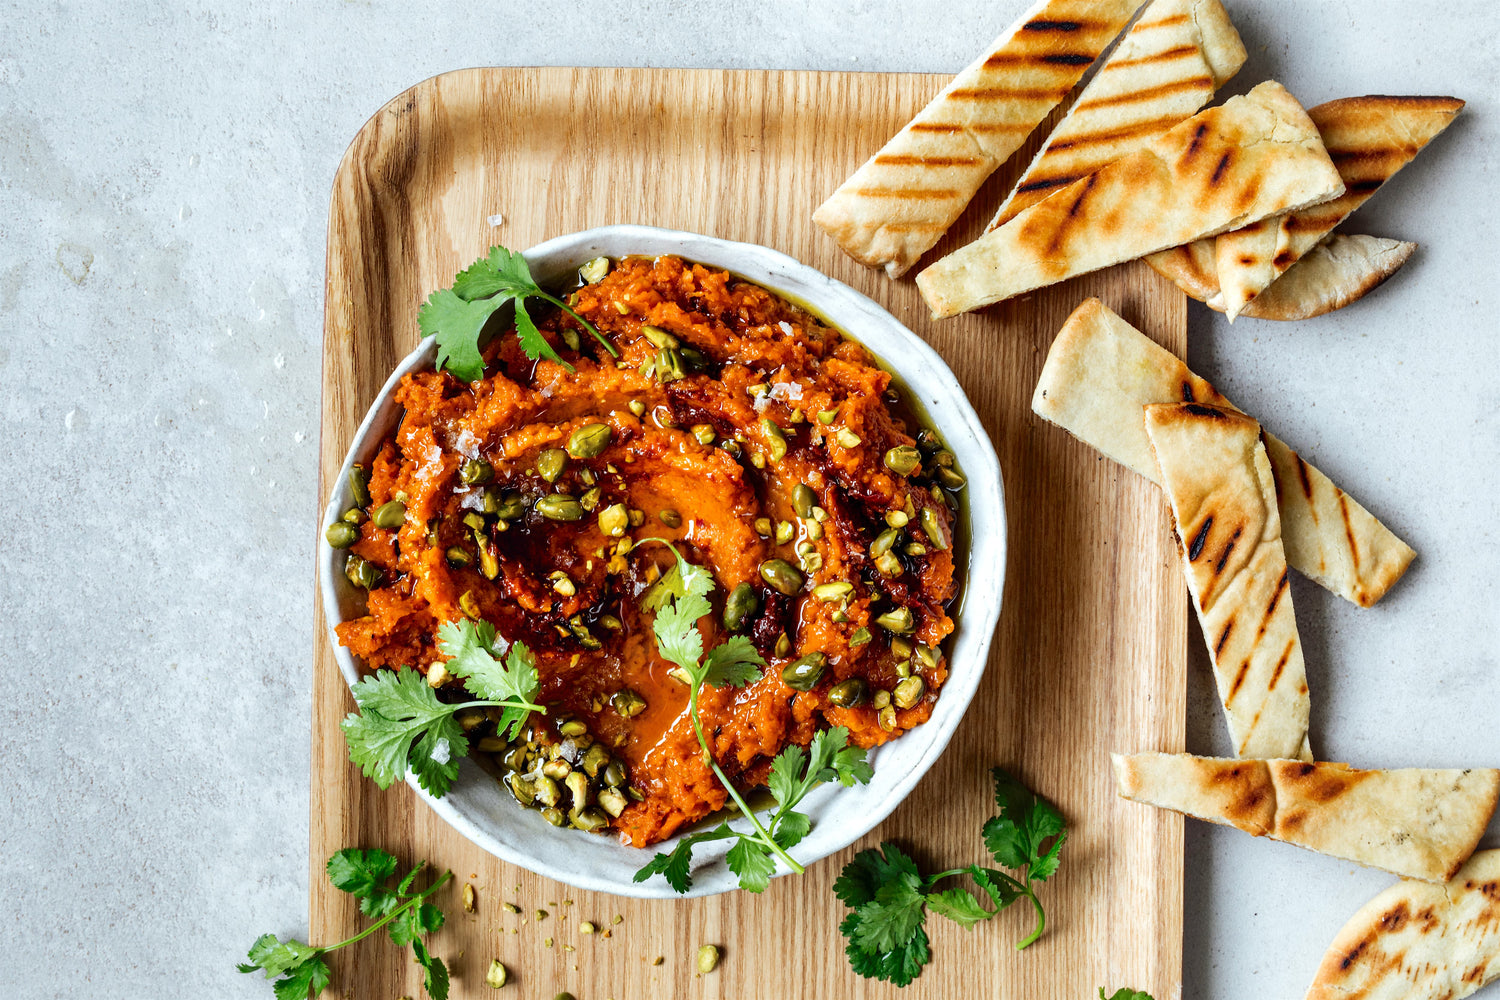 Crushed carrot dip spiced with coriander and harissa